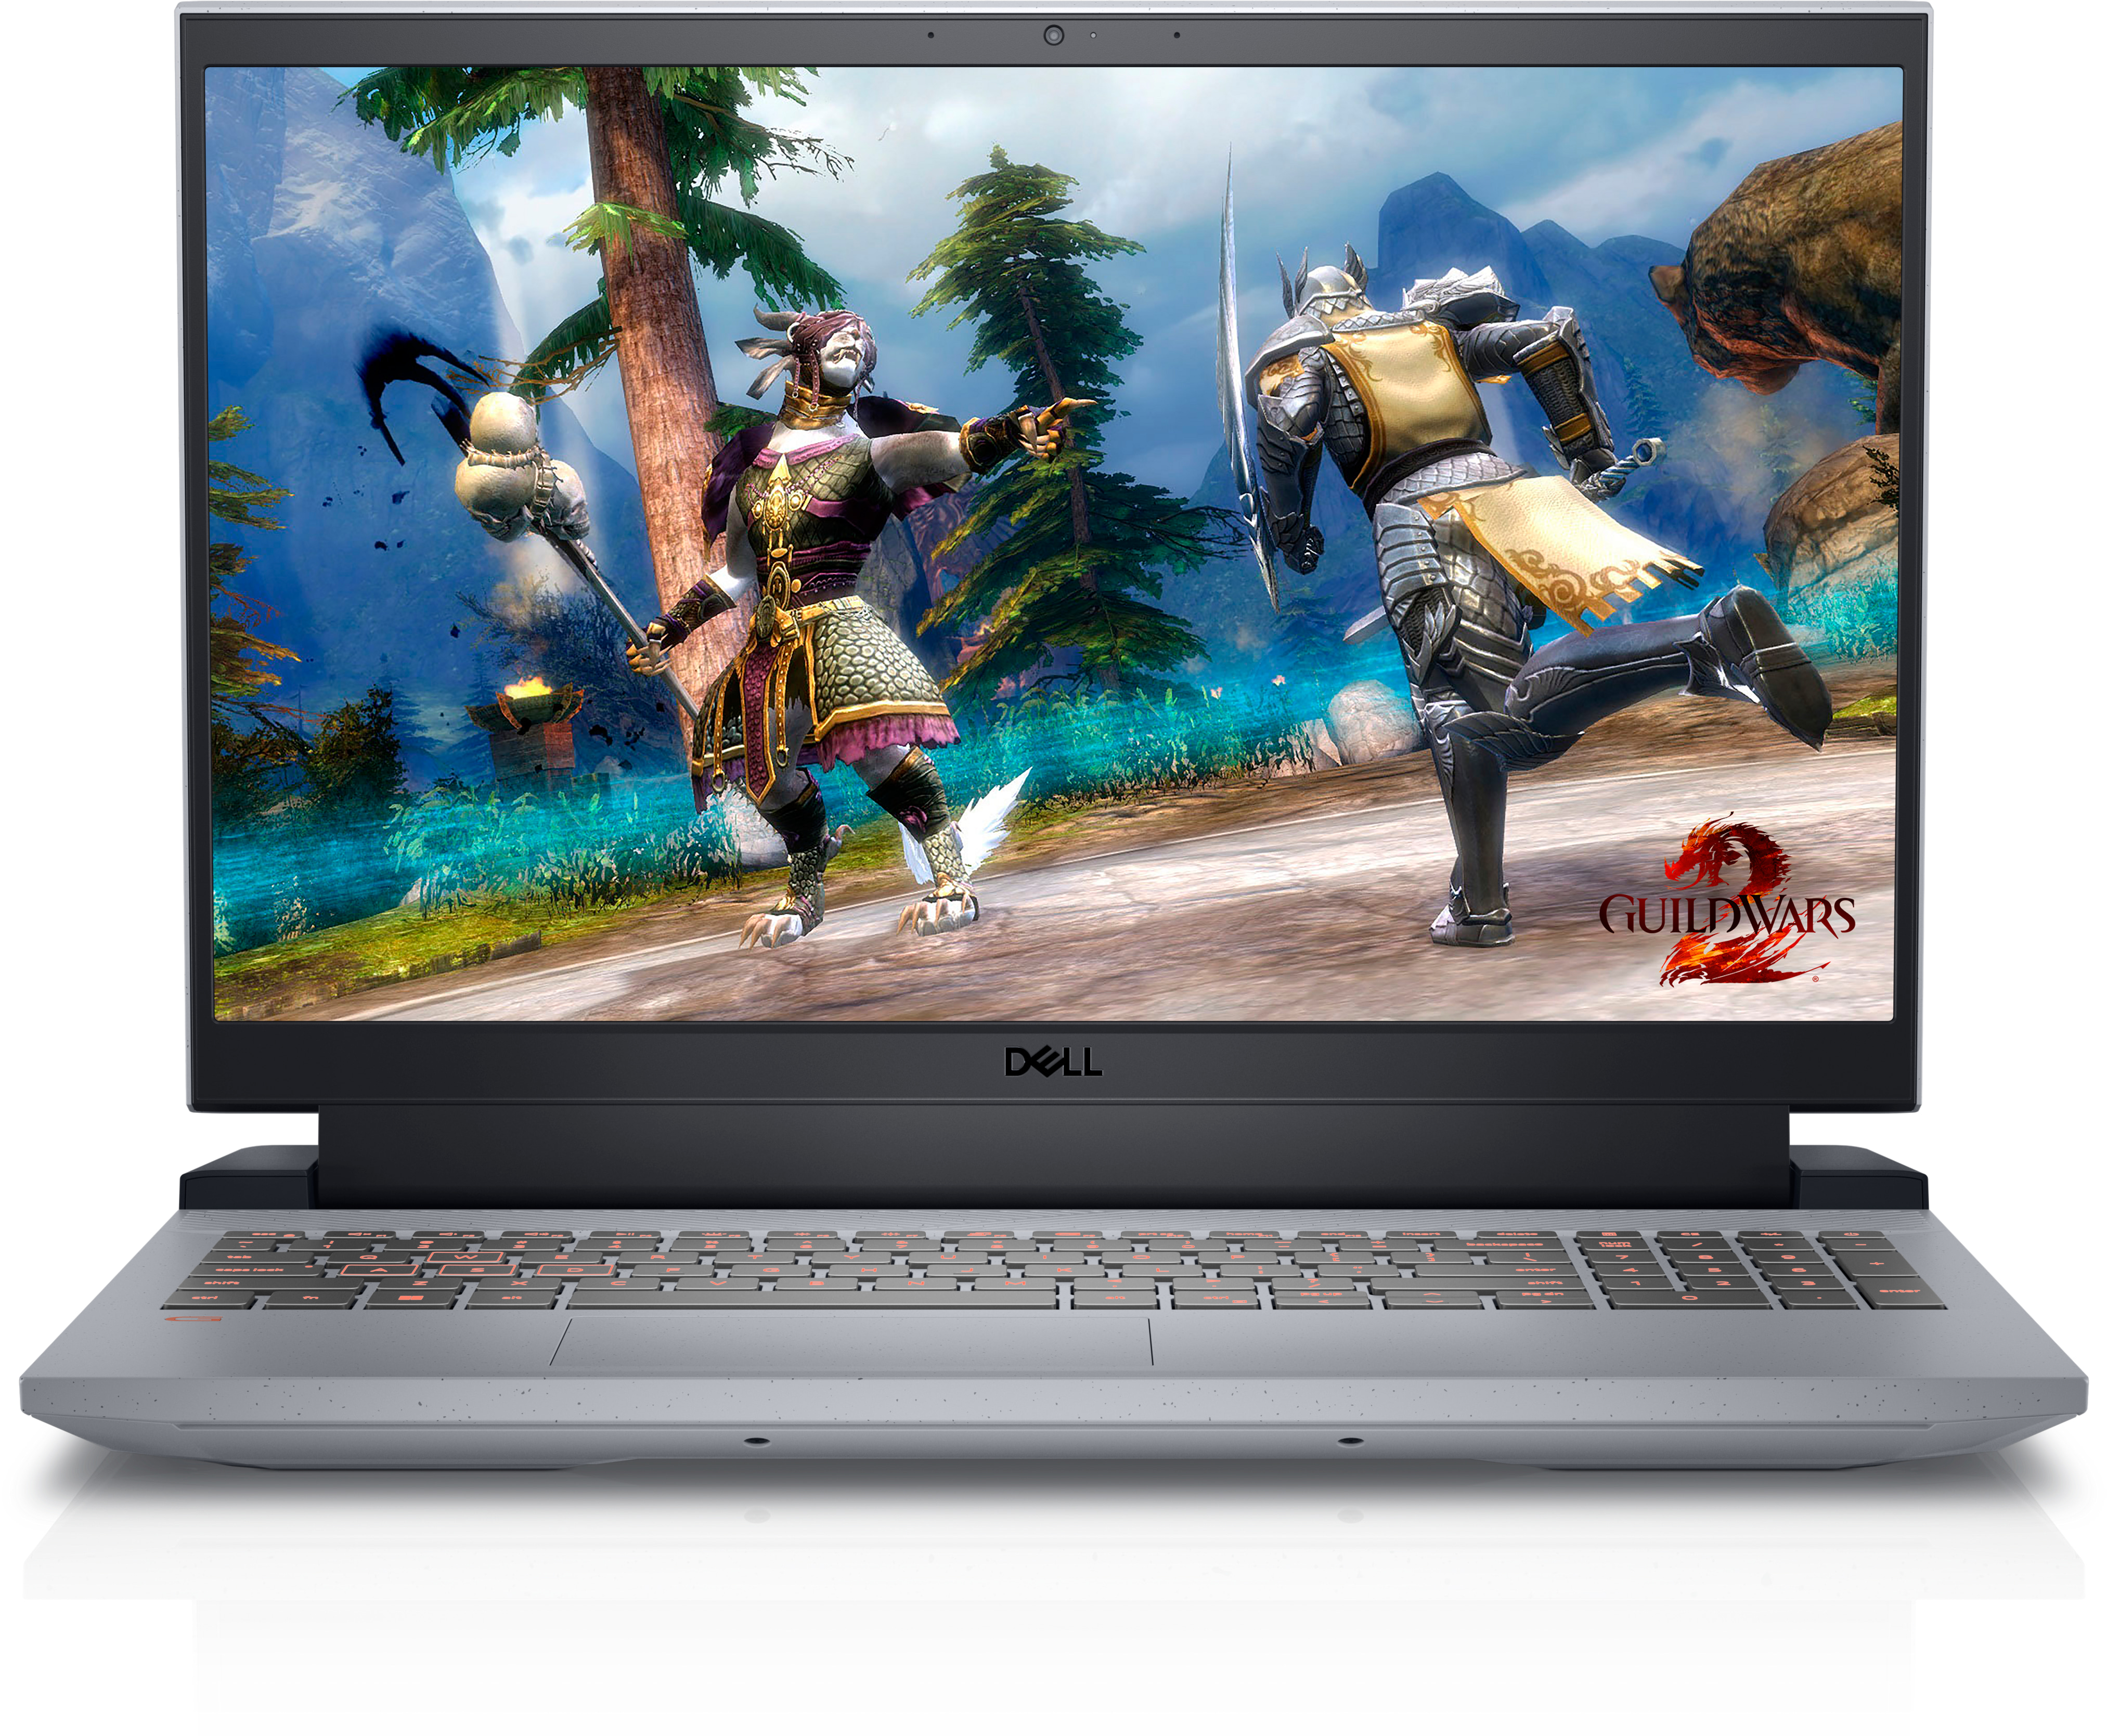 June George Stevenson accent Dell G15 Gaming Laptop : Gaming Laptops | Dell USA